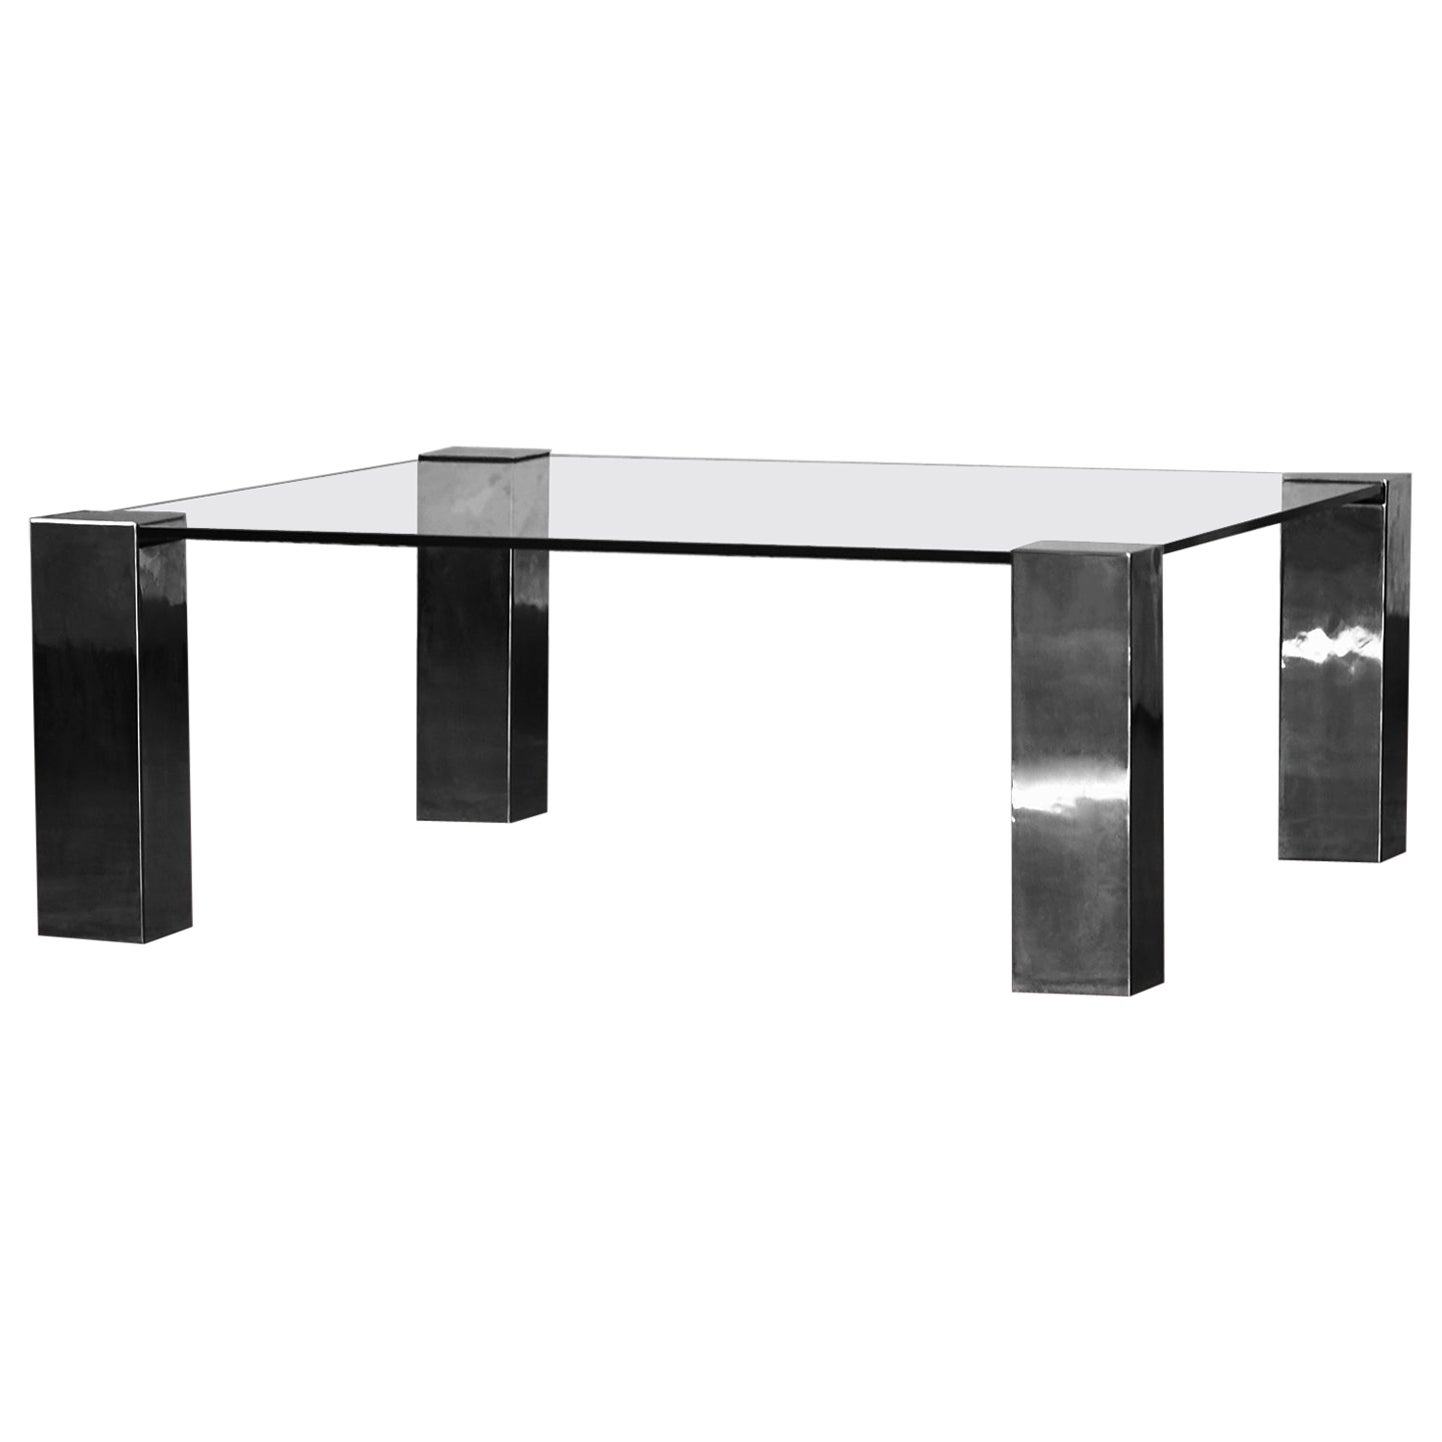 Willy Rizzo coffee table in chromed metal and dark glass.